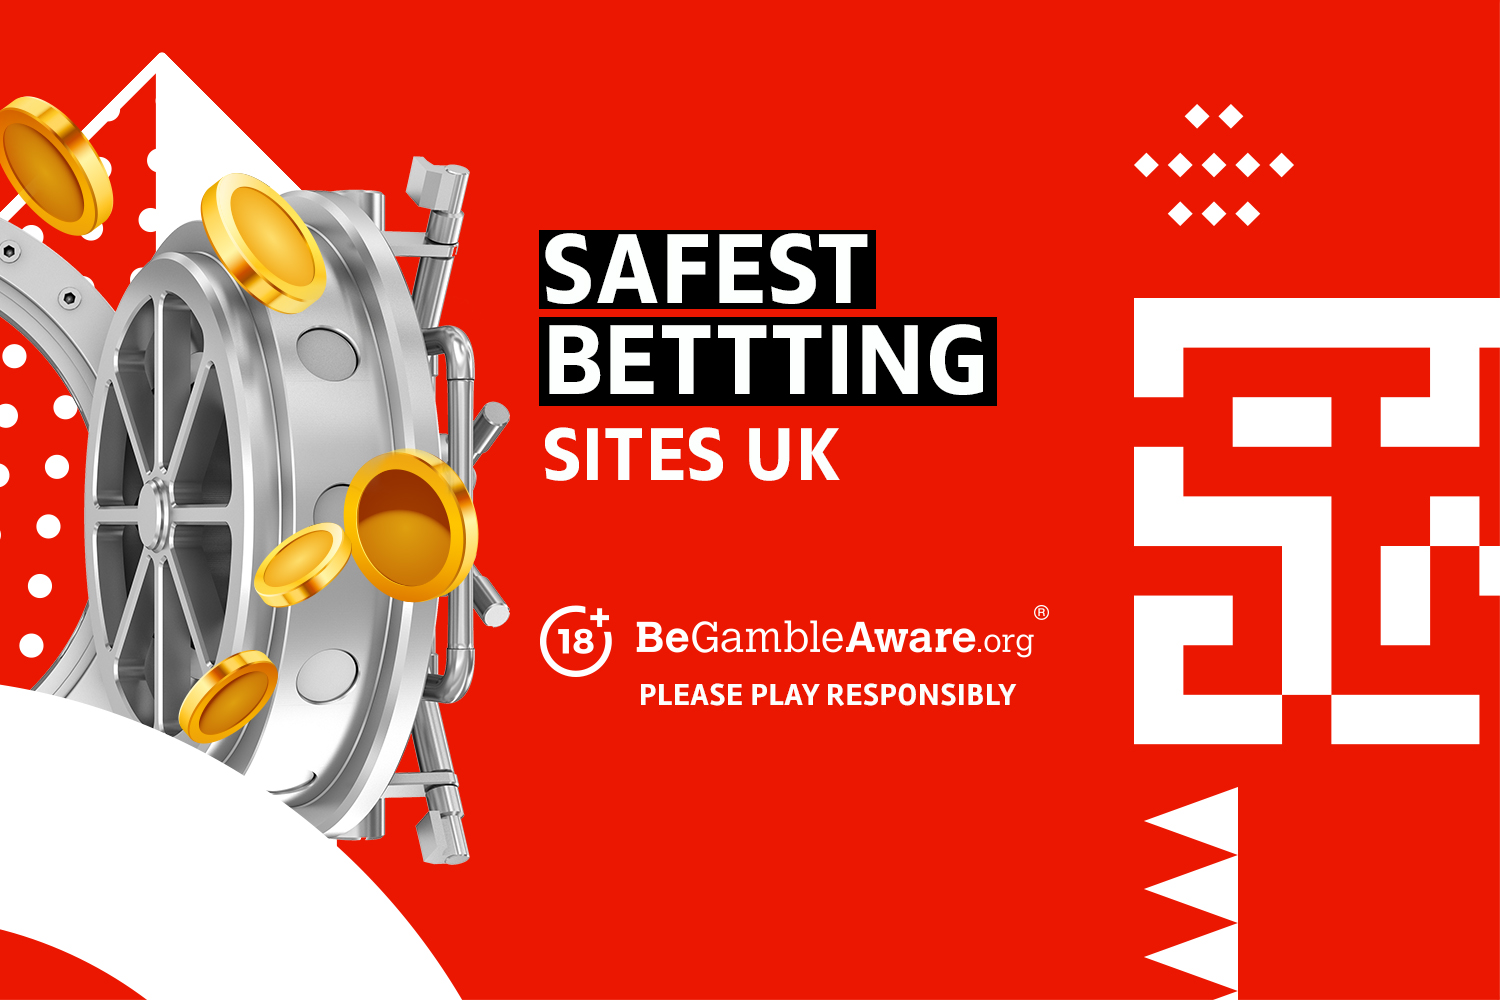 Safest betting sites UK. 18+ BeGambleAware.org Please play responsibly.